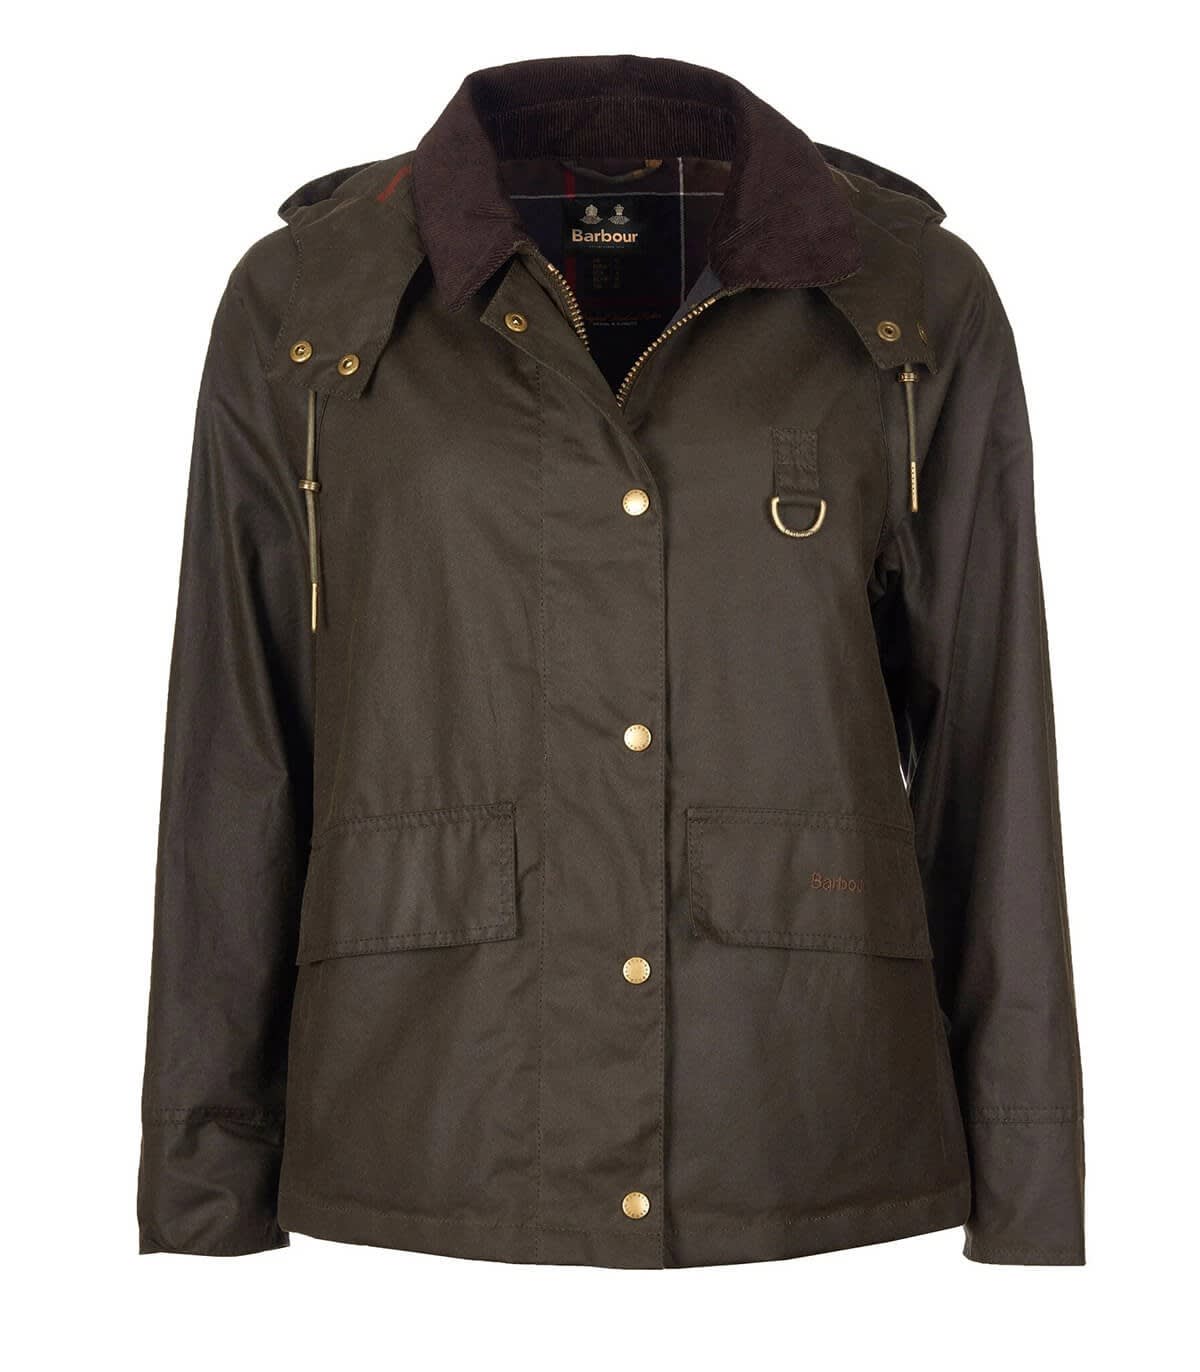 Barbour Avon Wax Olive Green Hooded Jacket